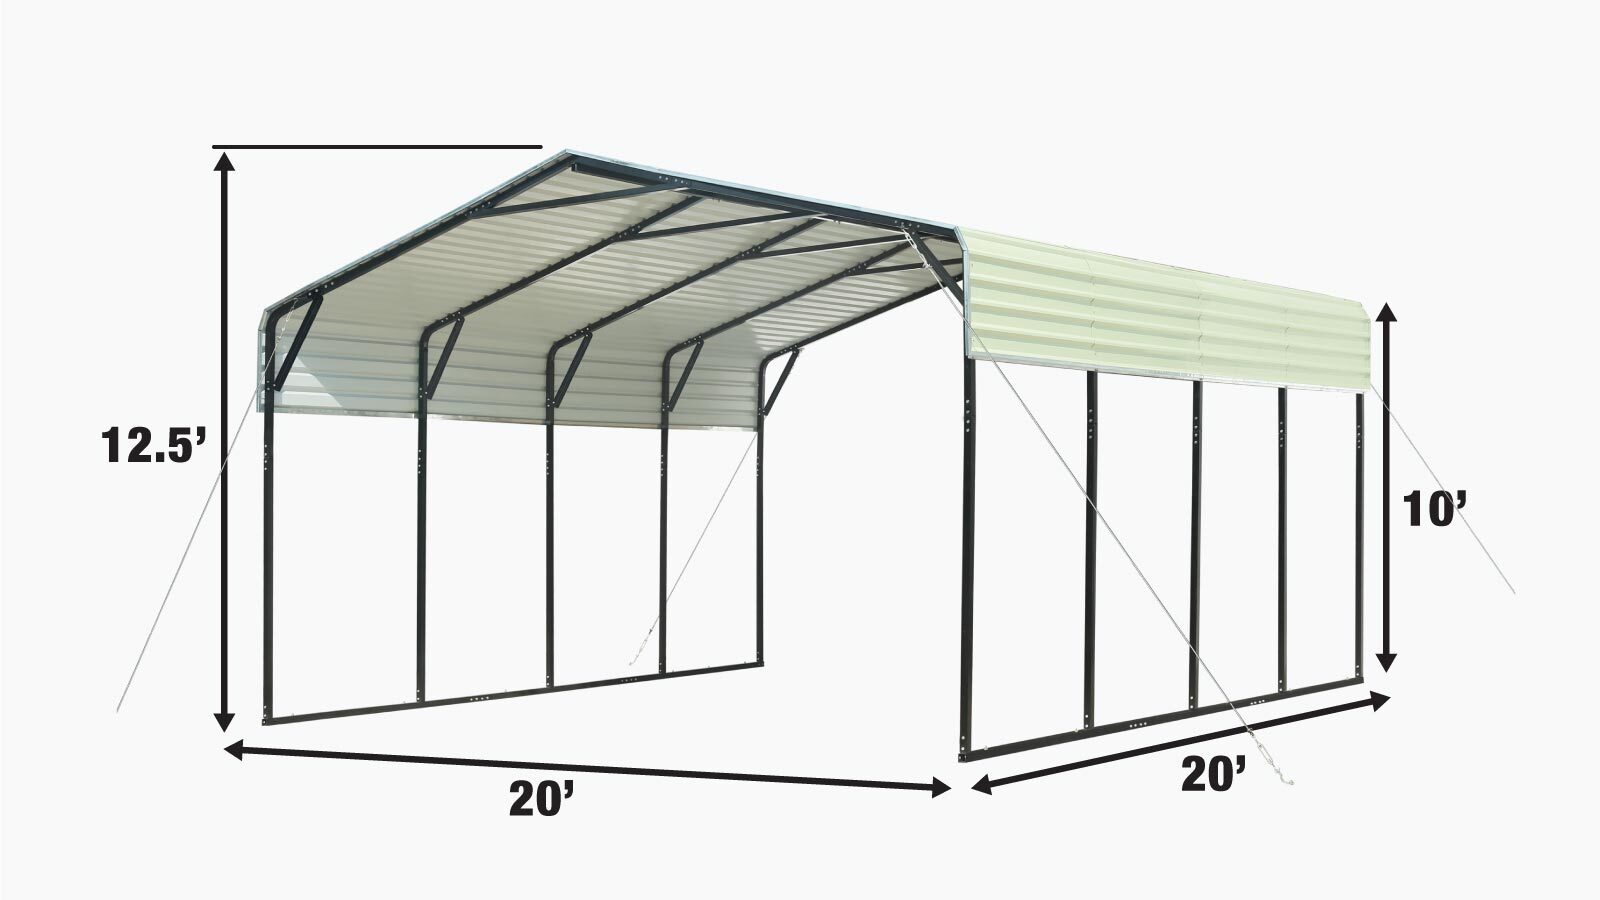 TMG Industrial 20’ x 20’ All-Steel Carport w/10’ Open Sidewalls, Galvanized Roof, Powder Coated, Polyester Paint Coating, Stabilizing Cables, TMG-CP2020-specifications-image